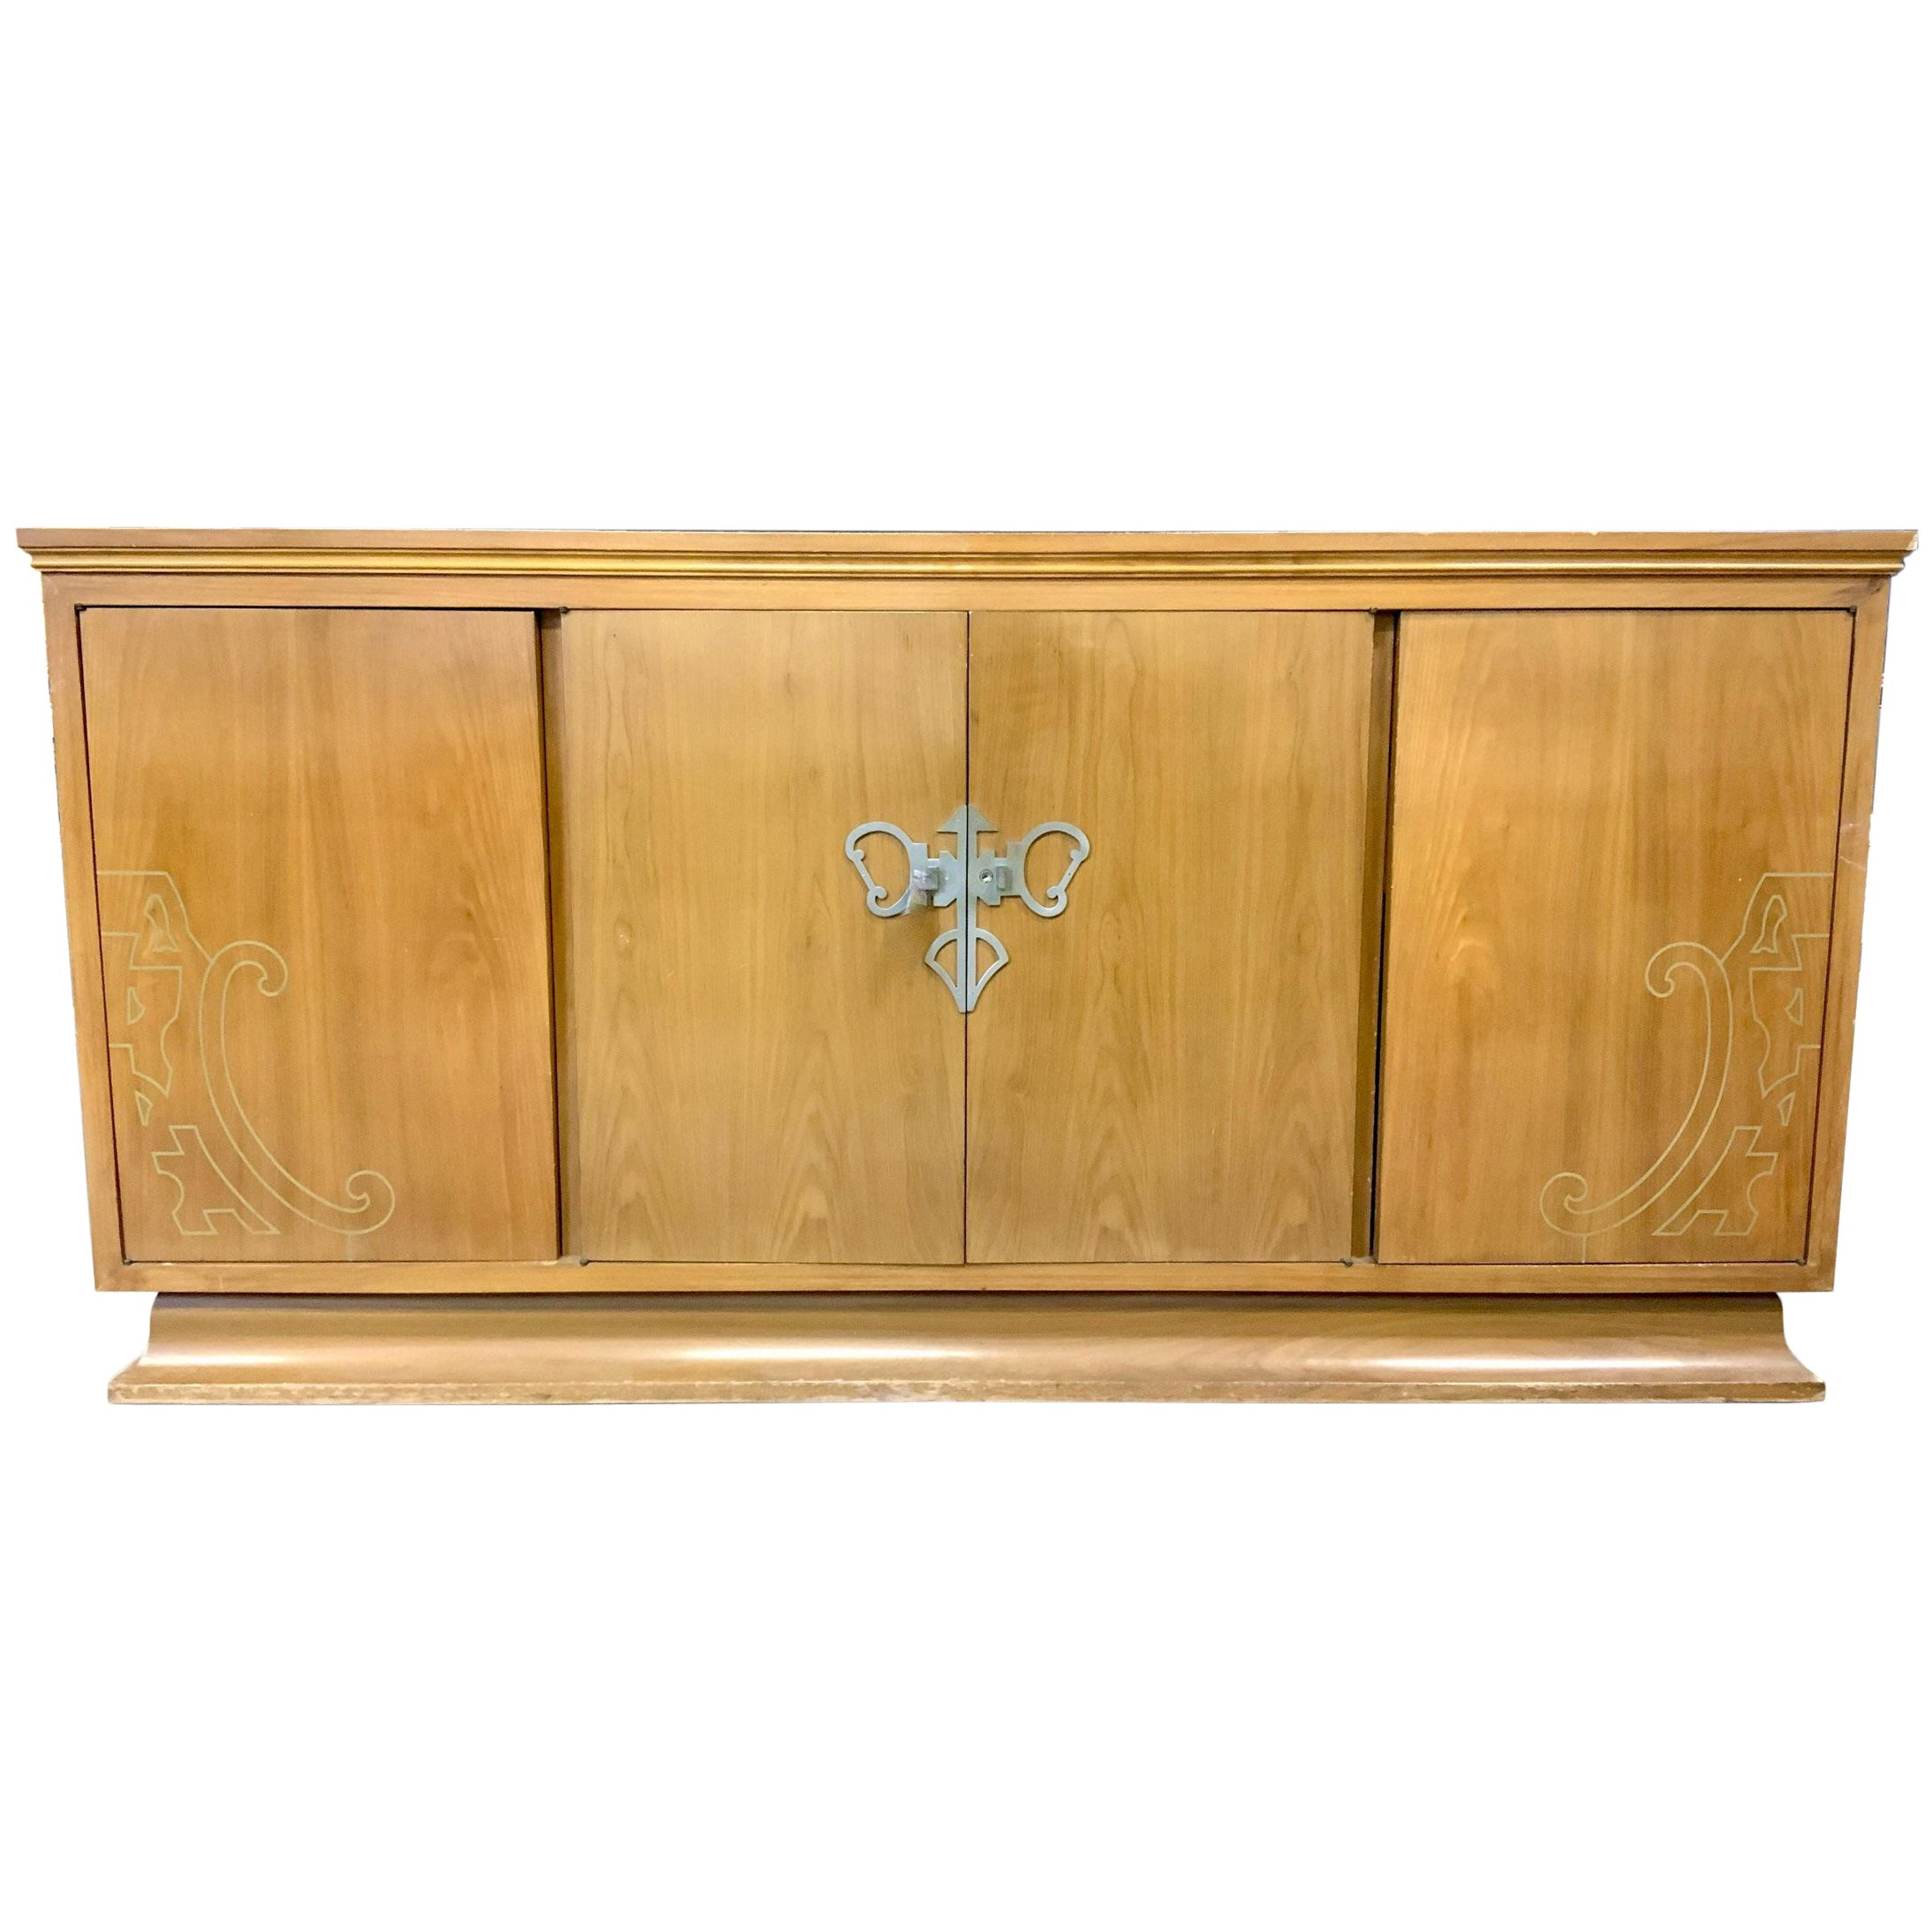 Art Nouveau Style Sideboard with Brass Inlay For Sale